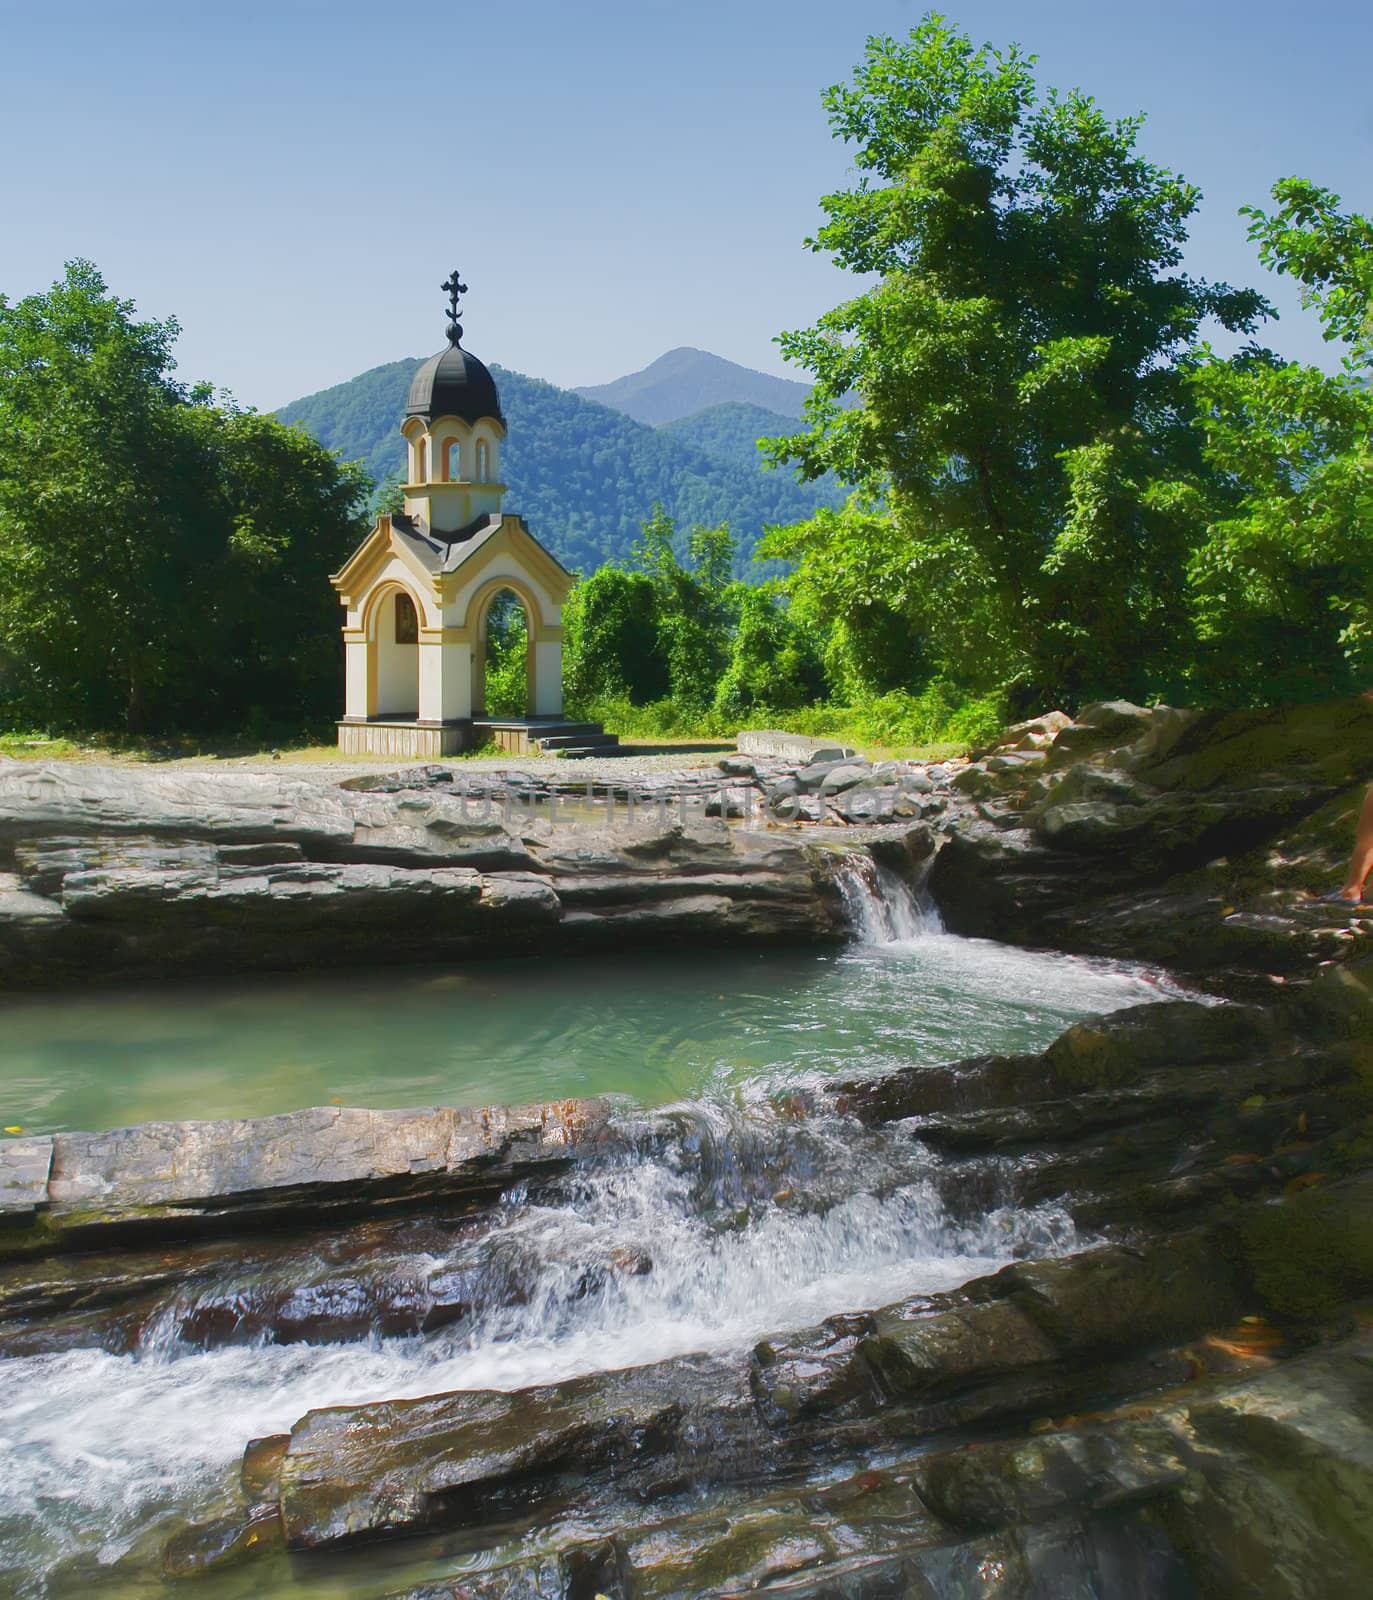 The chapel in the mountains on the banks of the waterfall